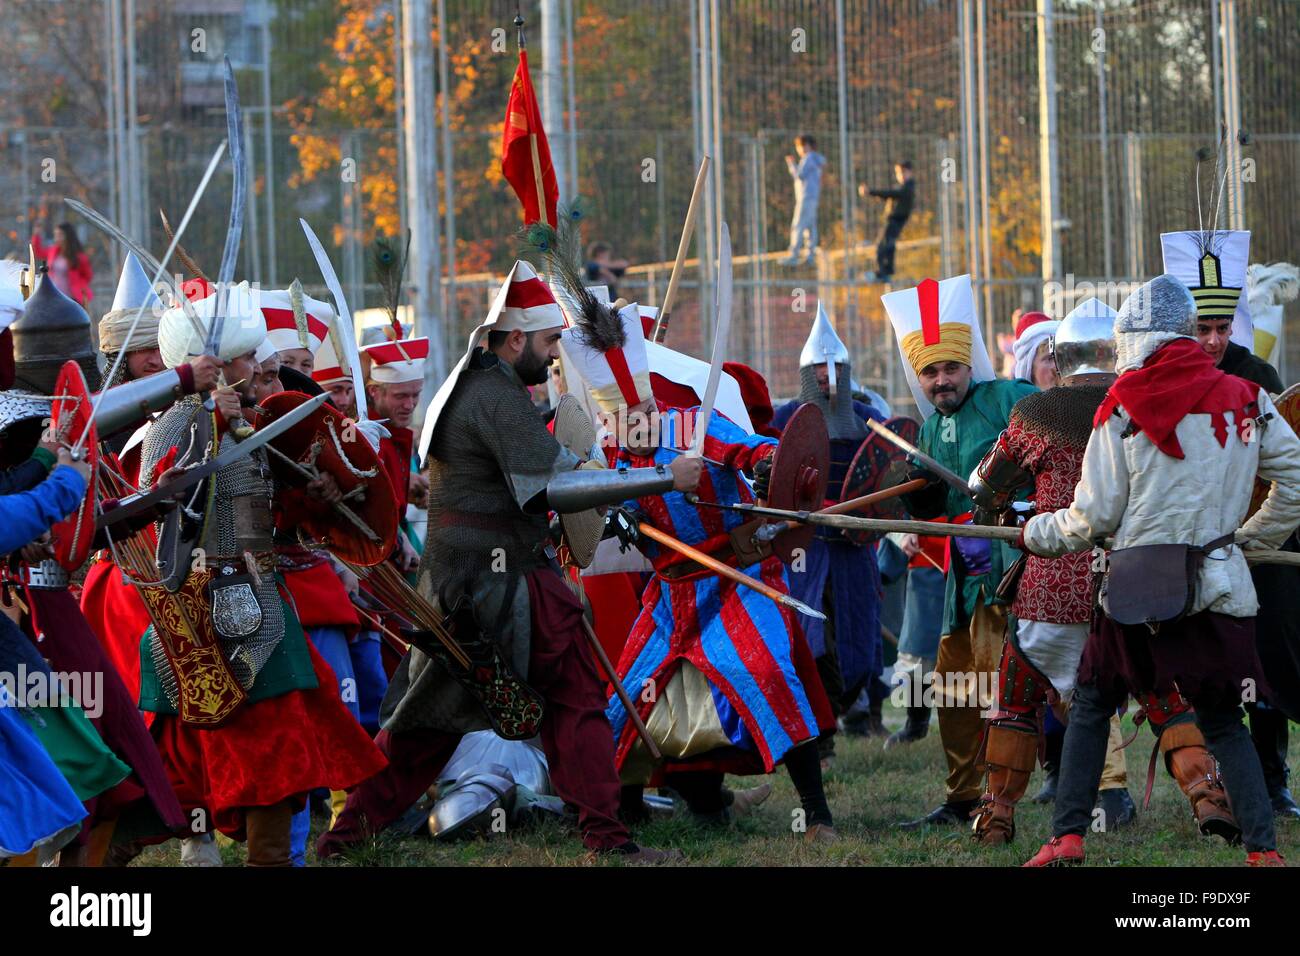 Actors from all around the world take part in a reenactment of the battle of Polish King Wladyslaw III Warnenczyk against Ottoman Turks 571 years ago near the town of Varna, Bulgaria. Wladislav III set out with a small army on a crusade against the Turks, Stock Photo